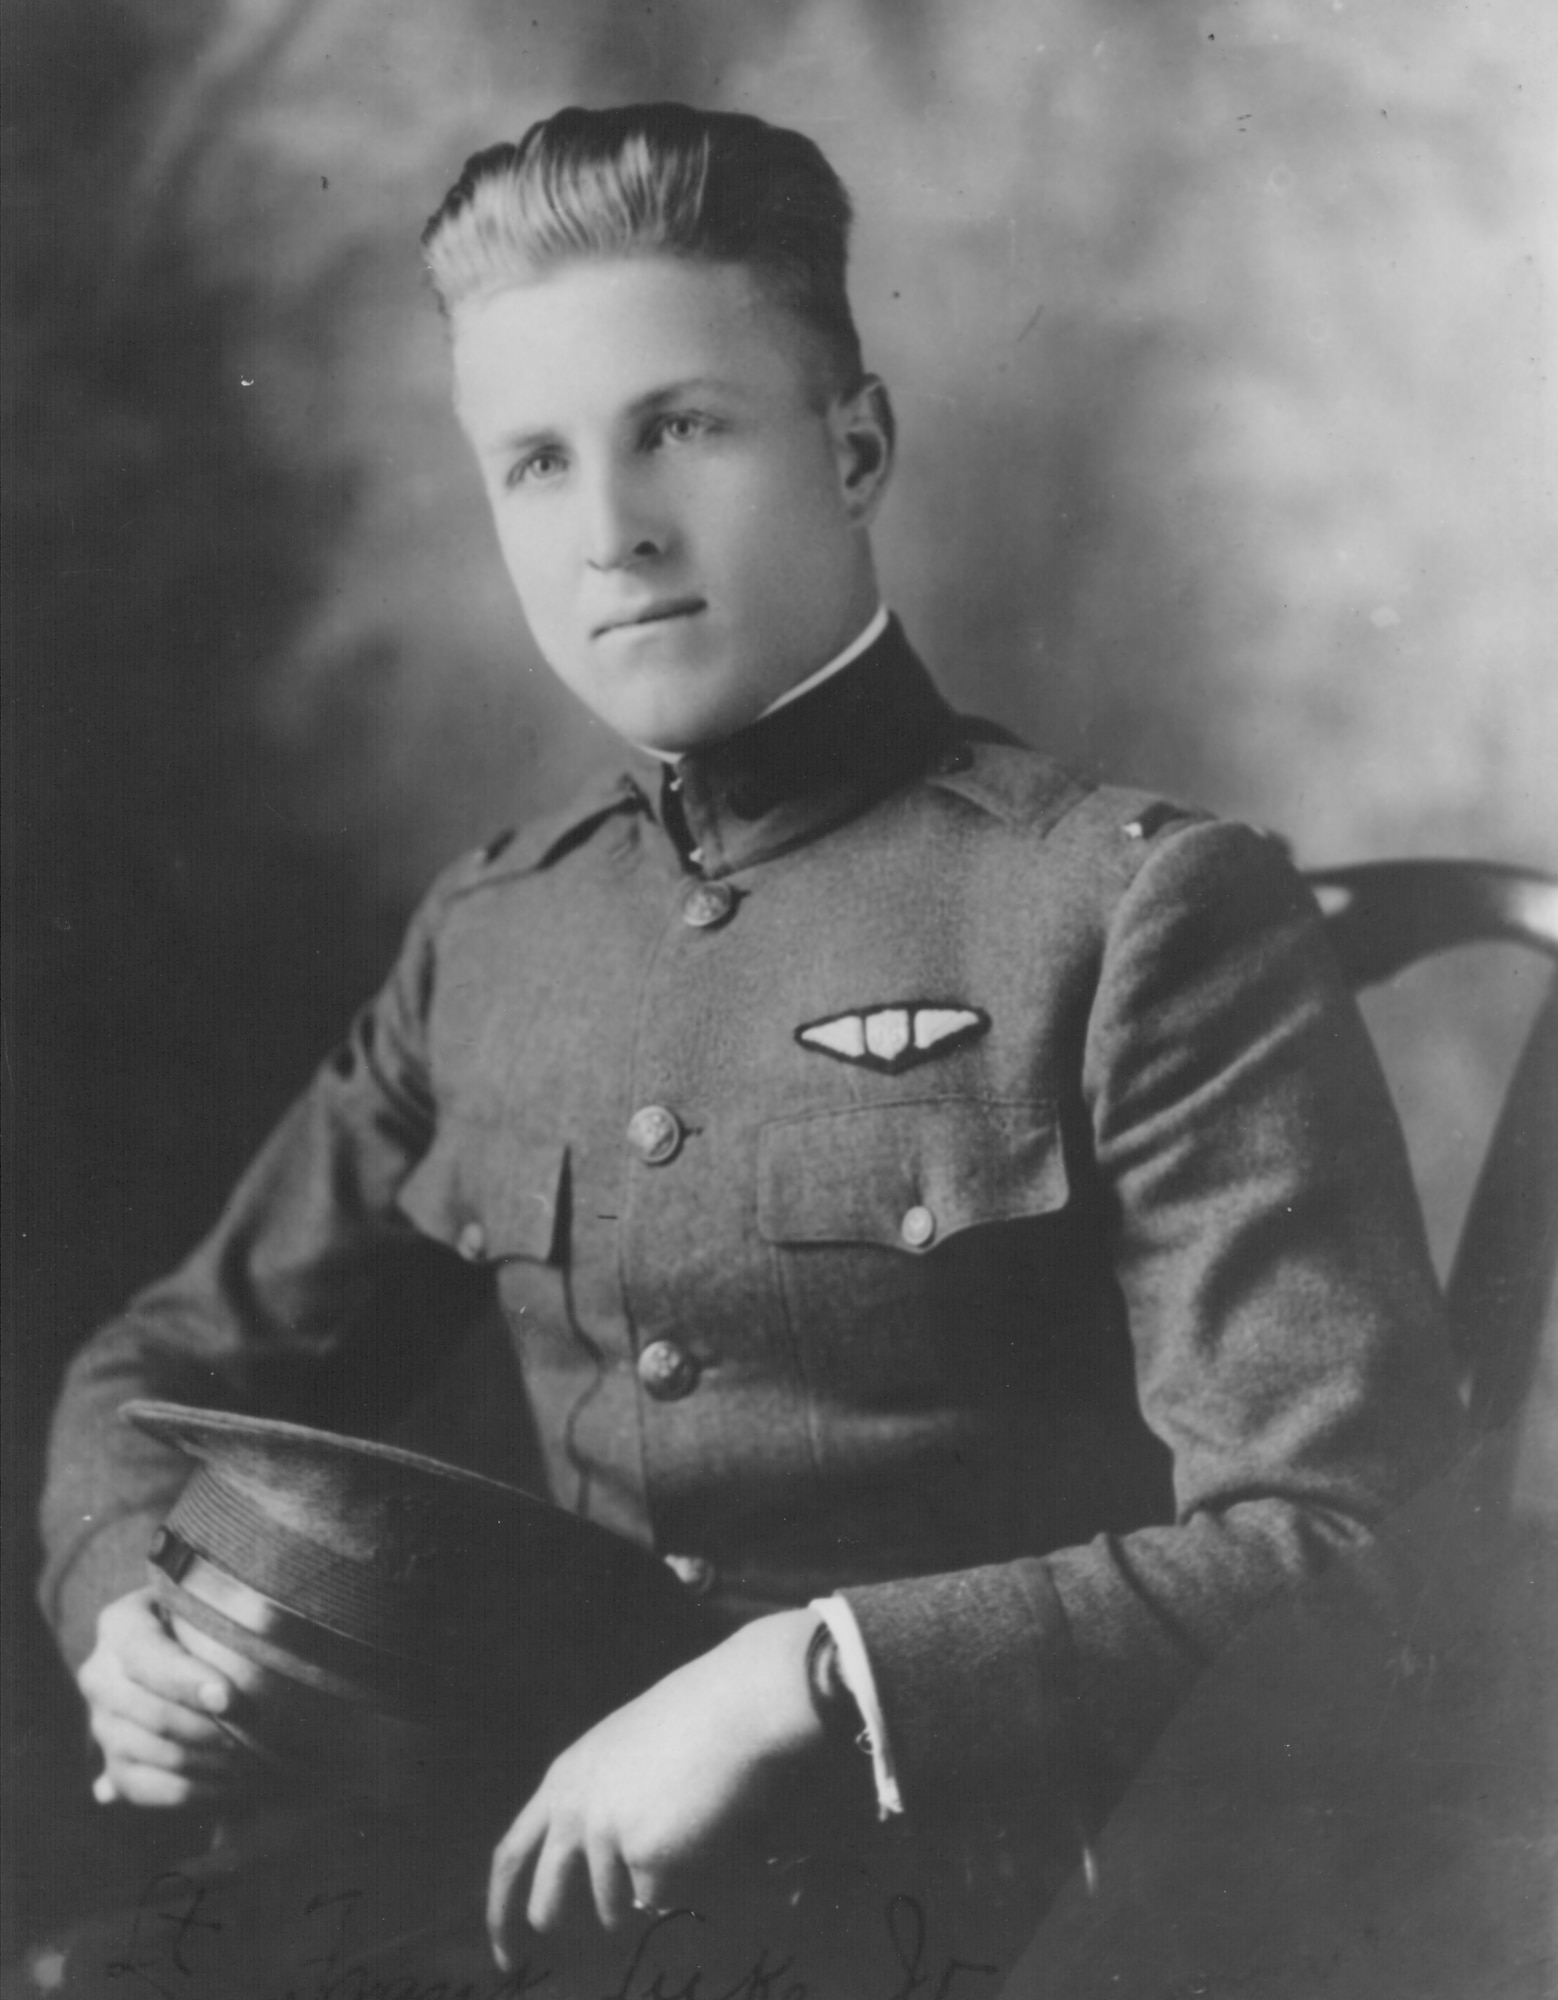 Medal of Honor recipient, WWI